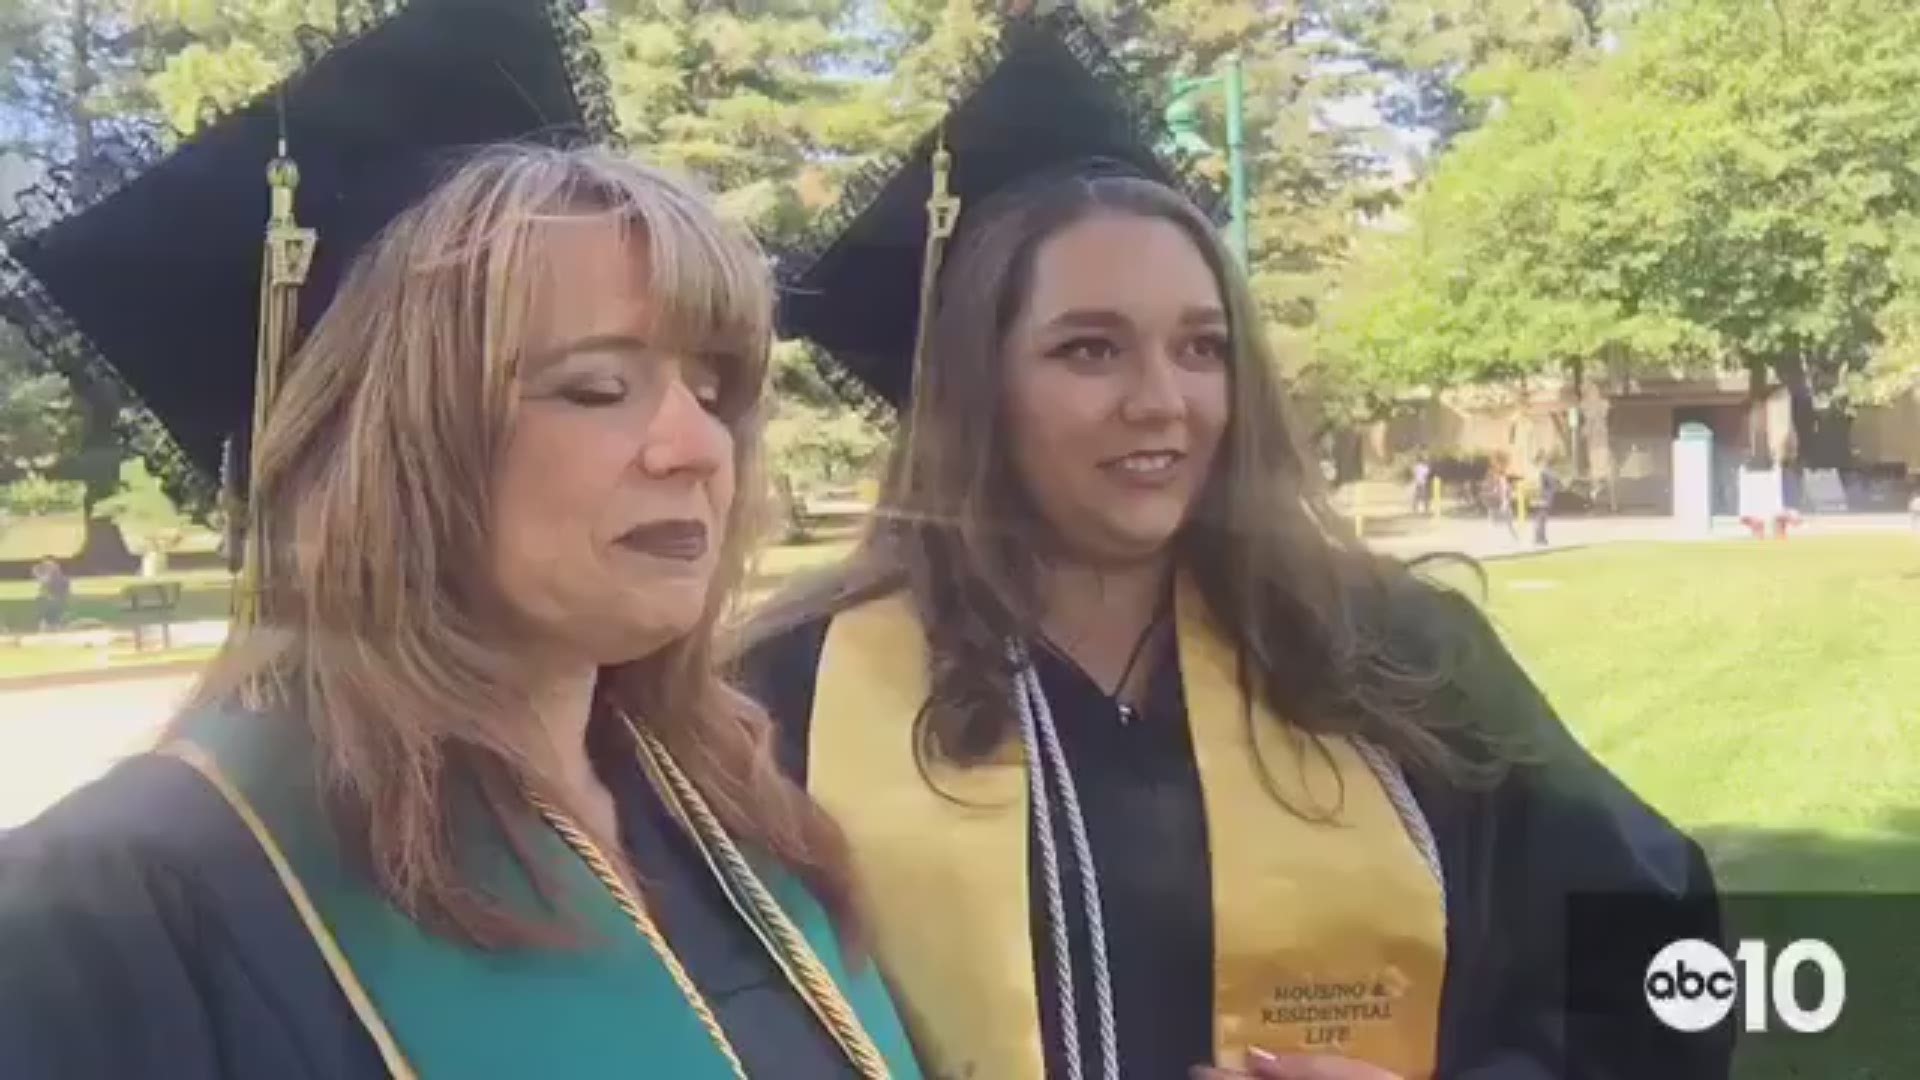 Mother-daughter duo to walk across graduation stage at Sacramento State with honors. (May 17, 2017)